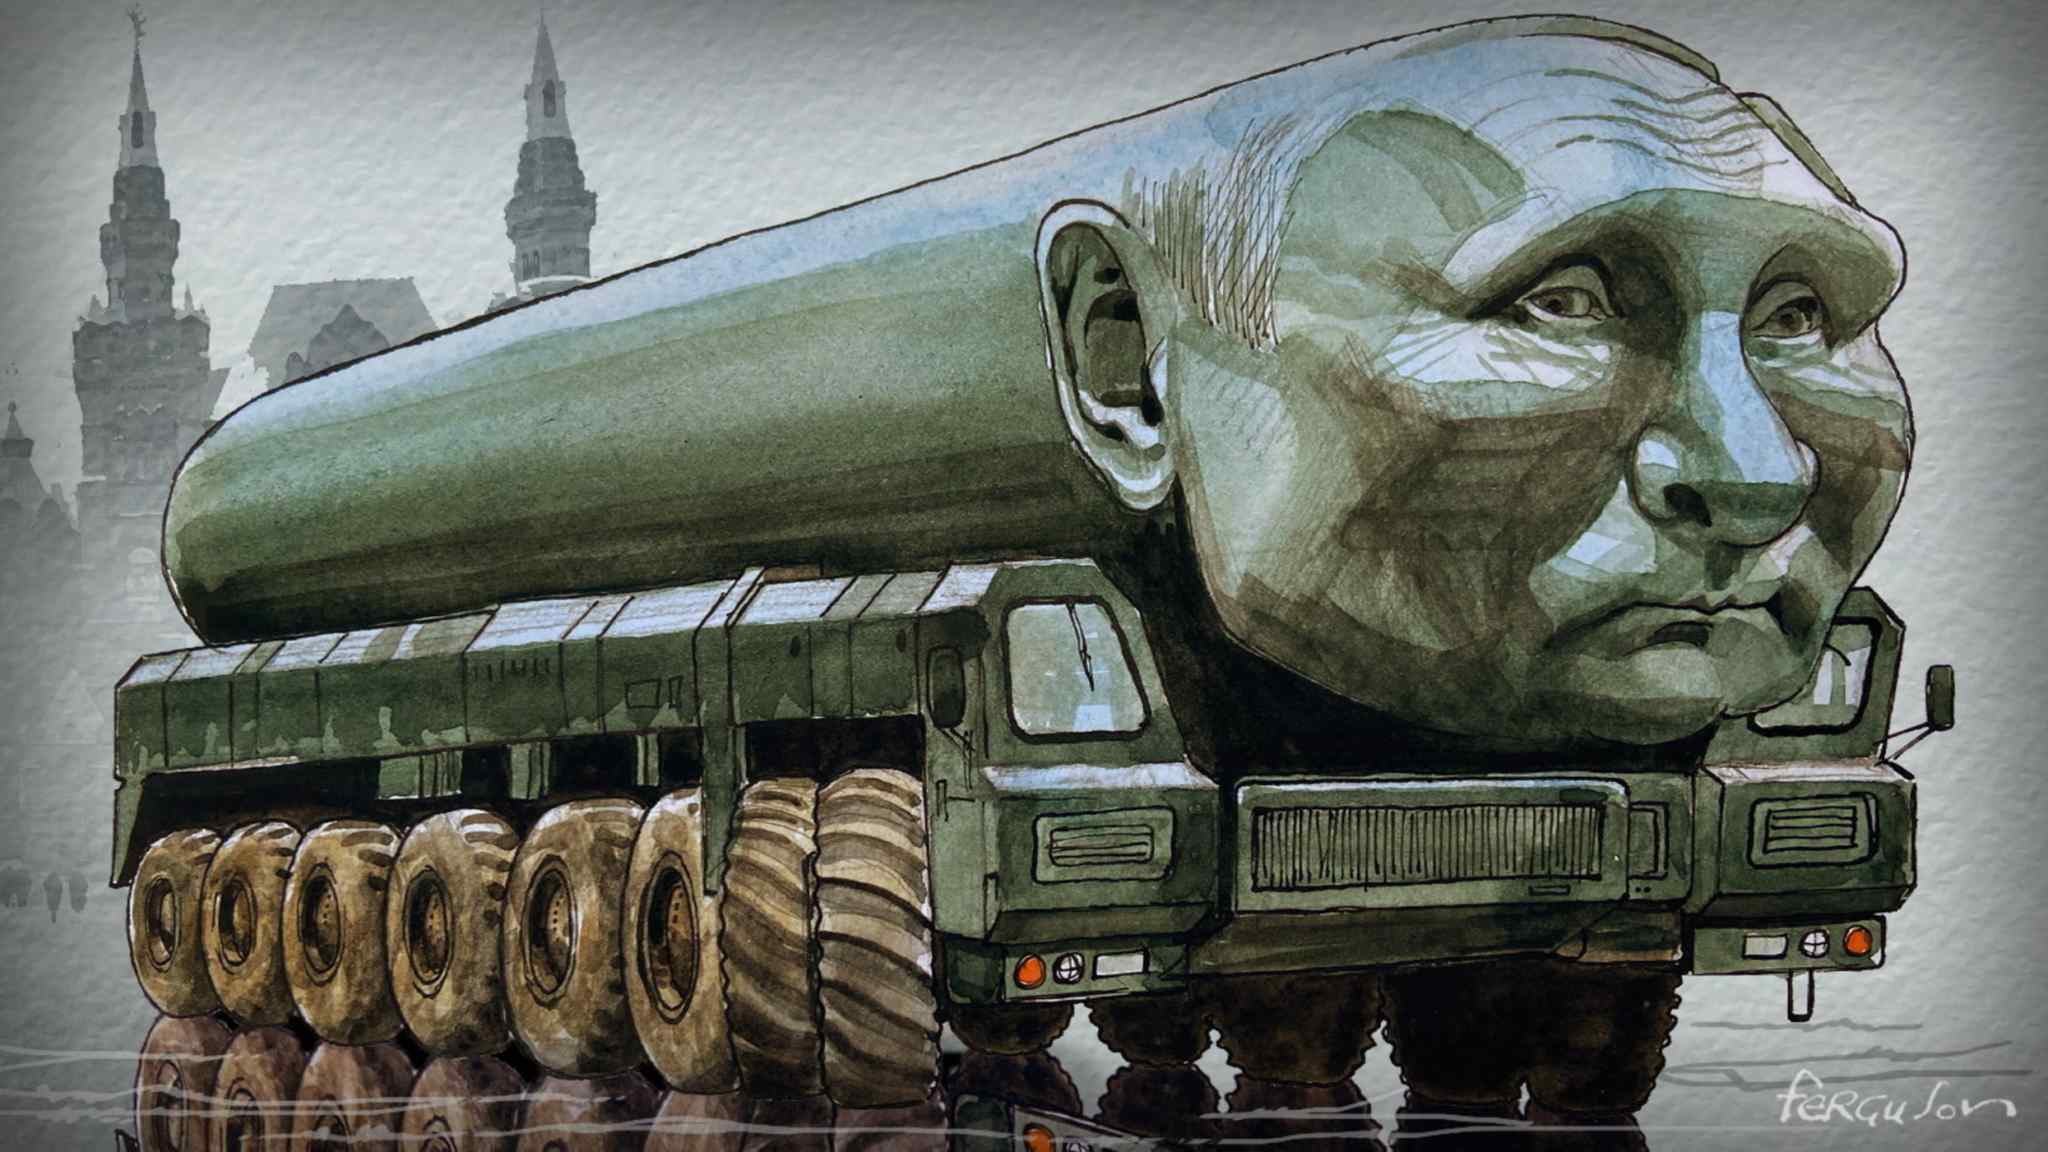 Putin’s nuclear threats cannot be ignored